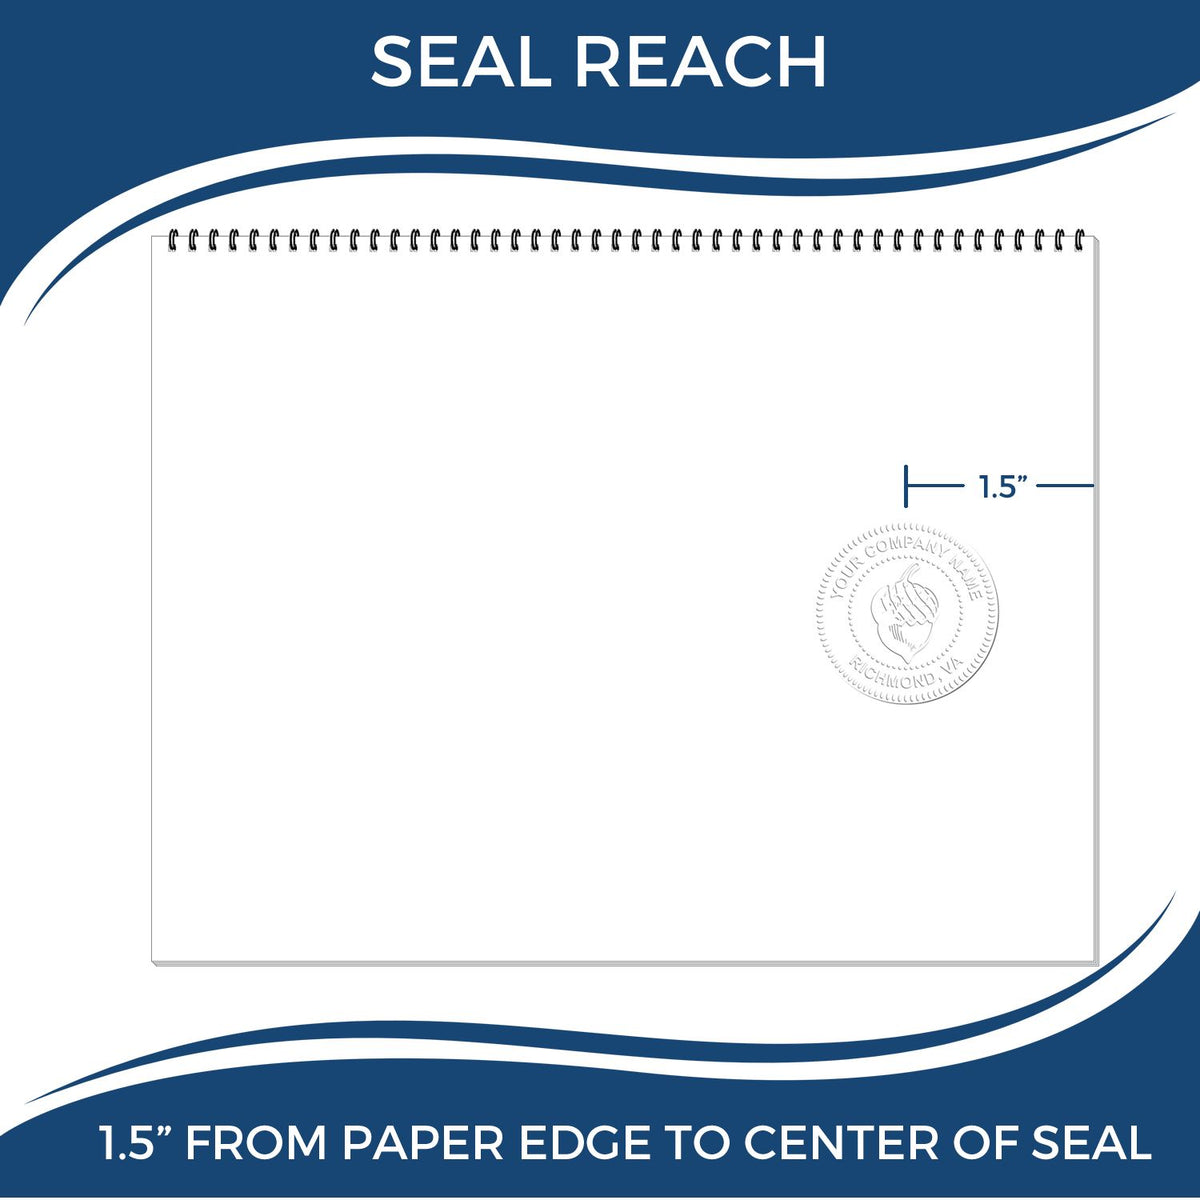 An infographic showing the seal reach which is represented by a ruler and a miniature seal image of the Hybrid Florida Geologist Seal